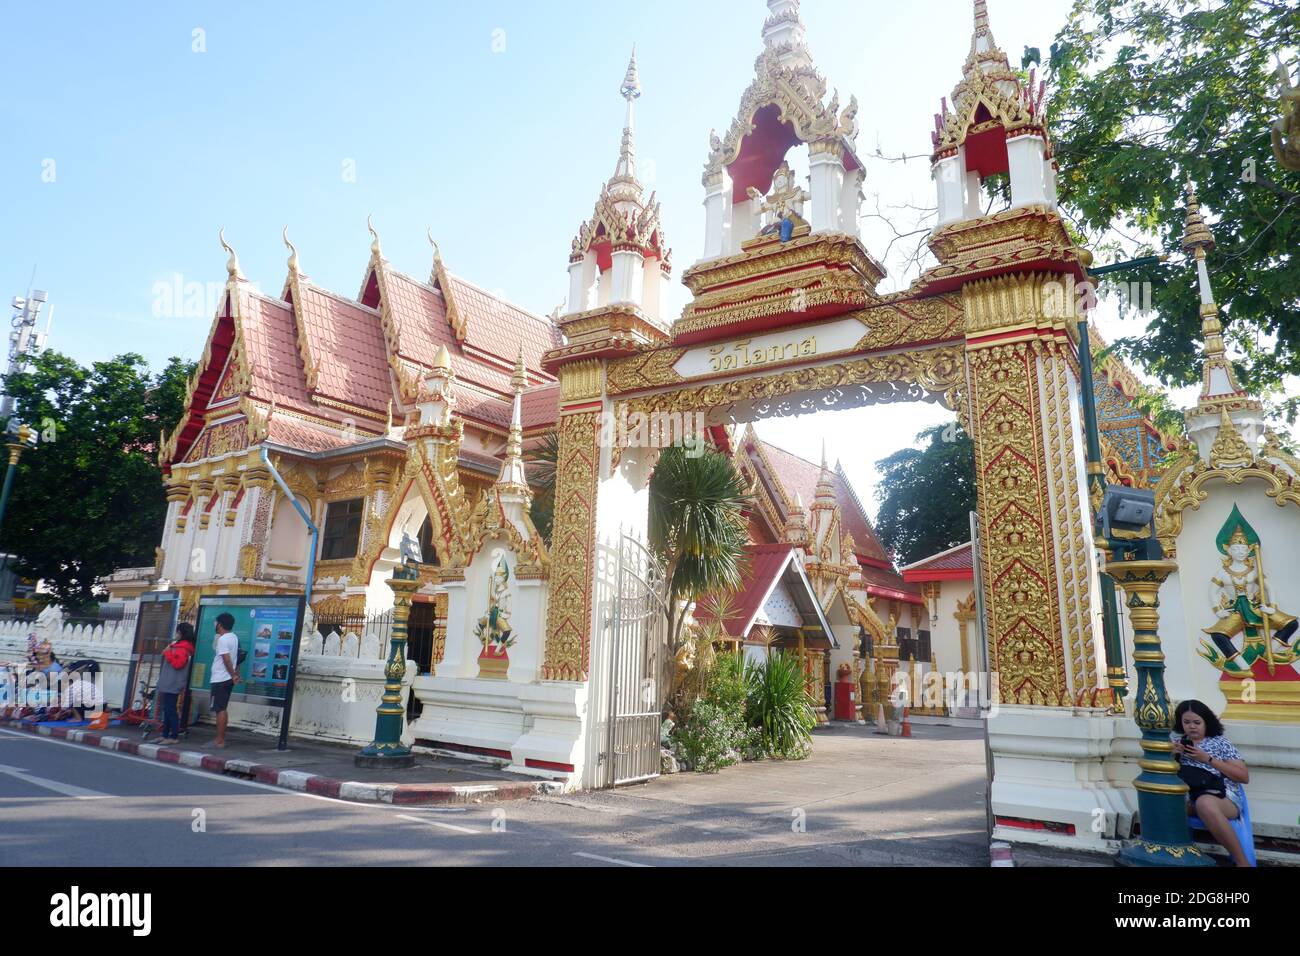 This Buddhist temple can be found just a long walking street of the Nakhon Phanom town. People usually pray here and give merit to the temple. Stock Photo